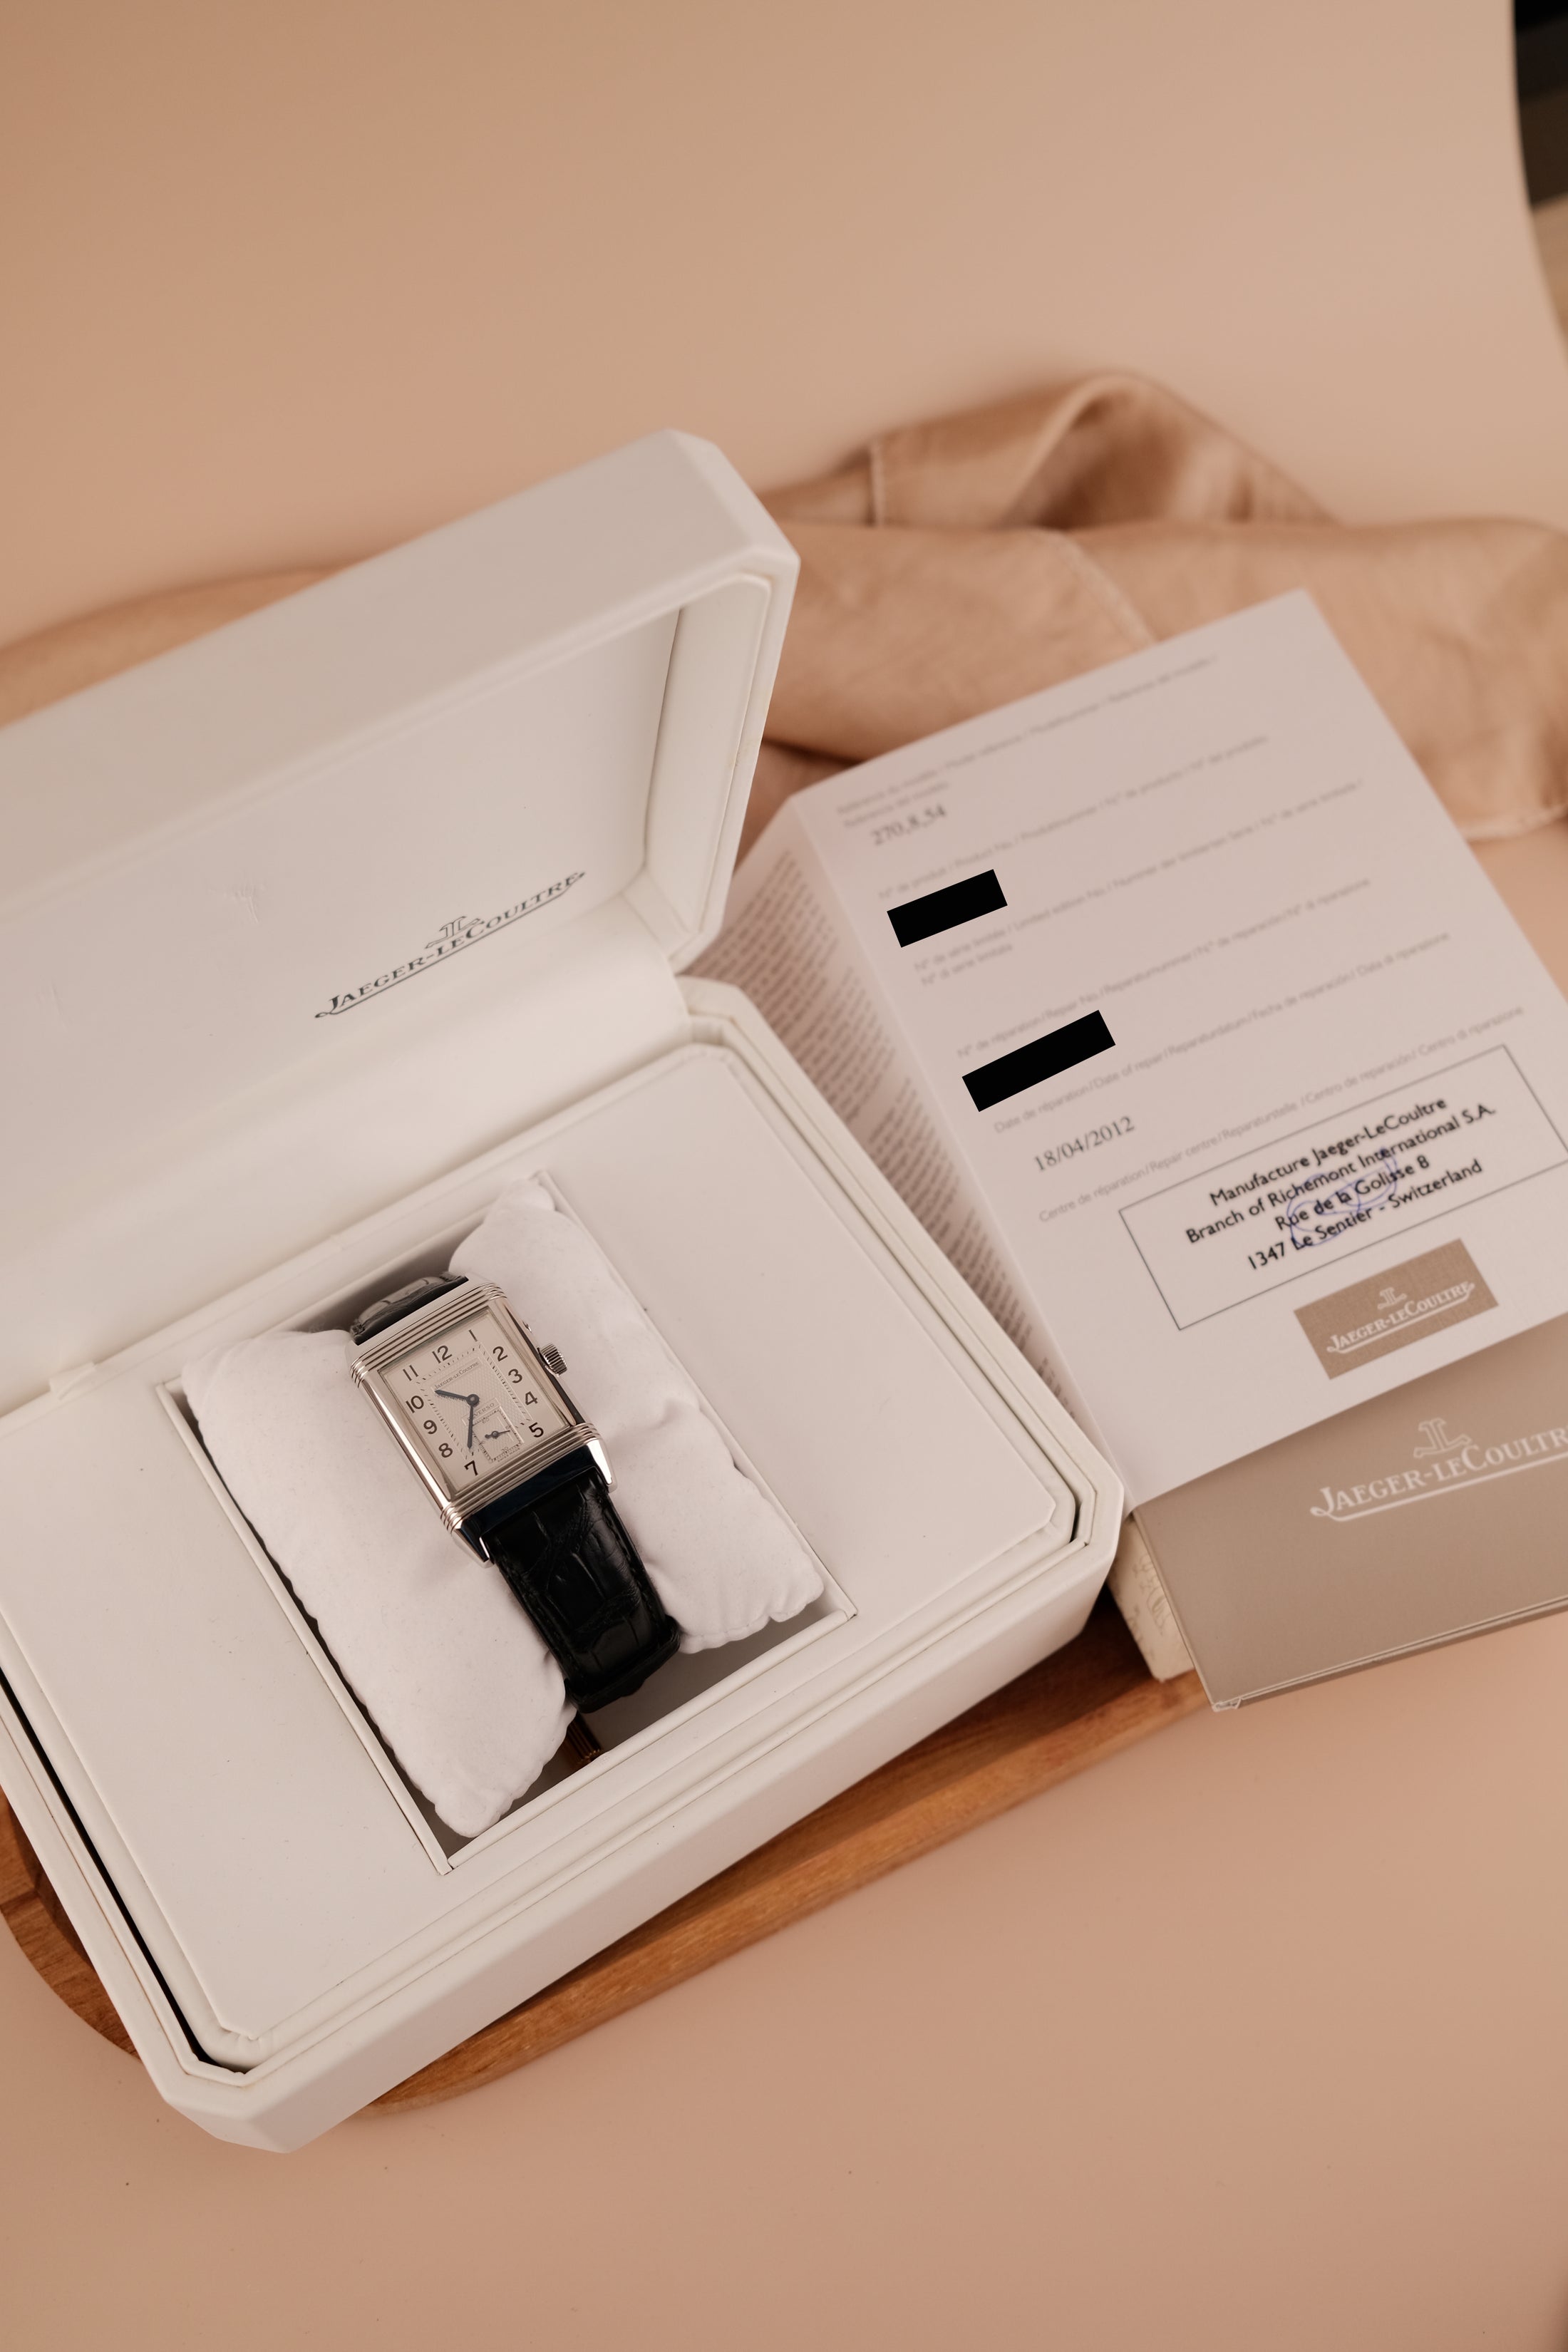 Jaeger-LeCoultre Reverso Duoface 270854 Box + Service Papers/Extrakt TOP ZUSTAND